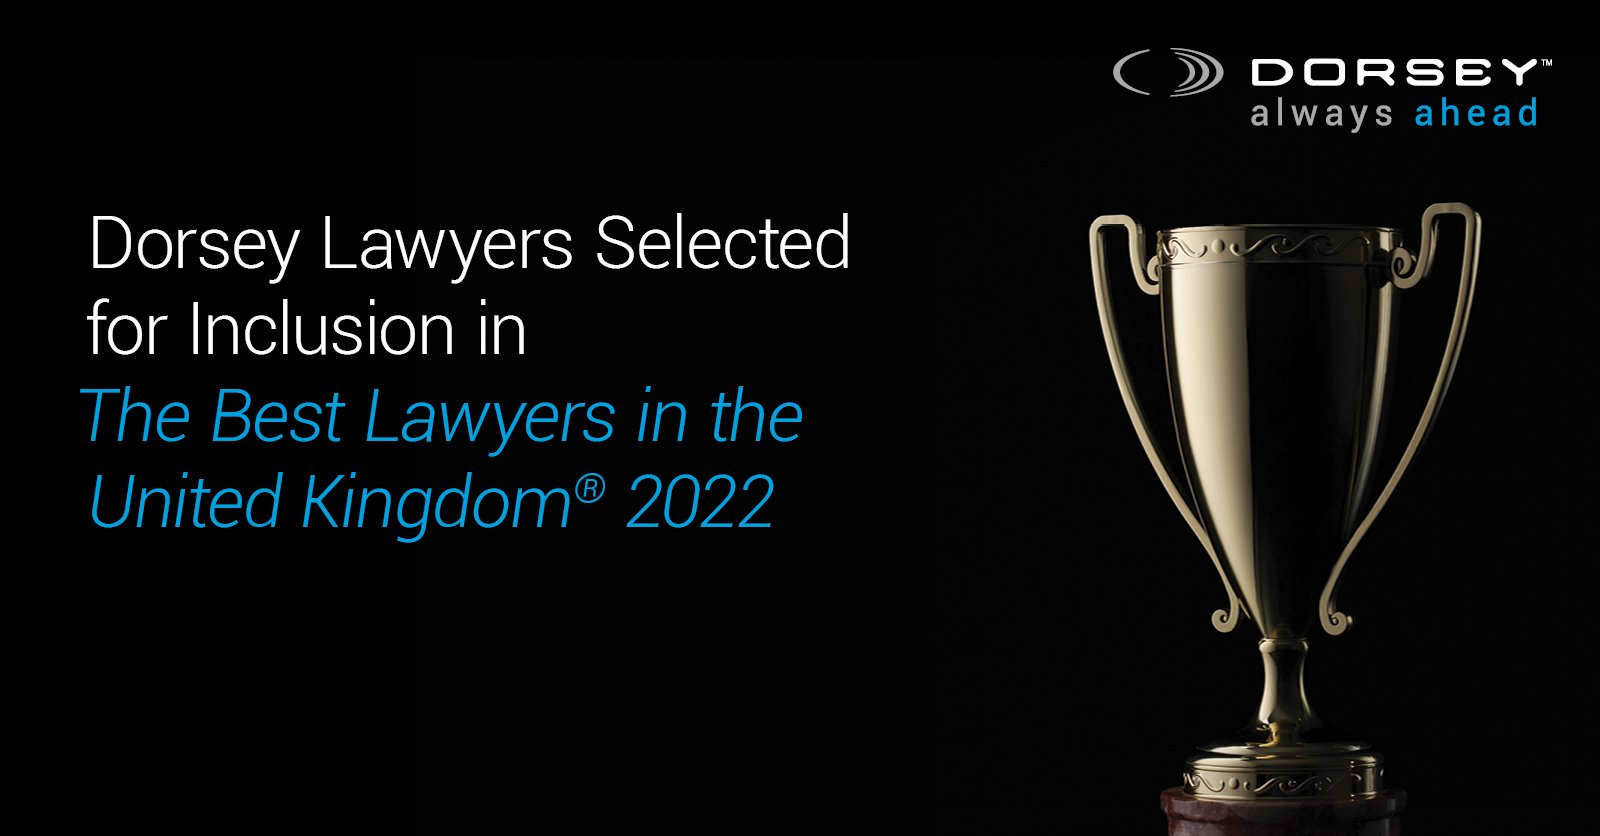 The Best Lawyers in the United Kingdom 2022